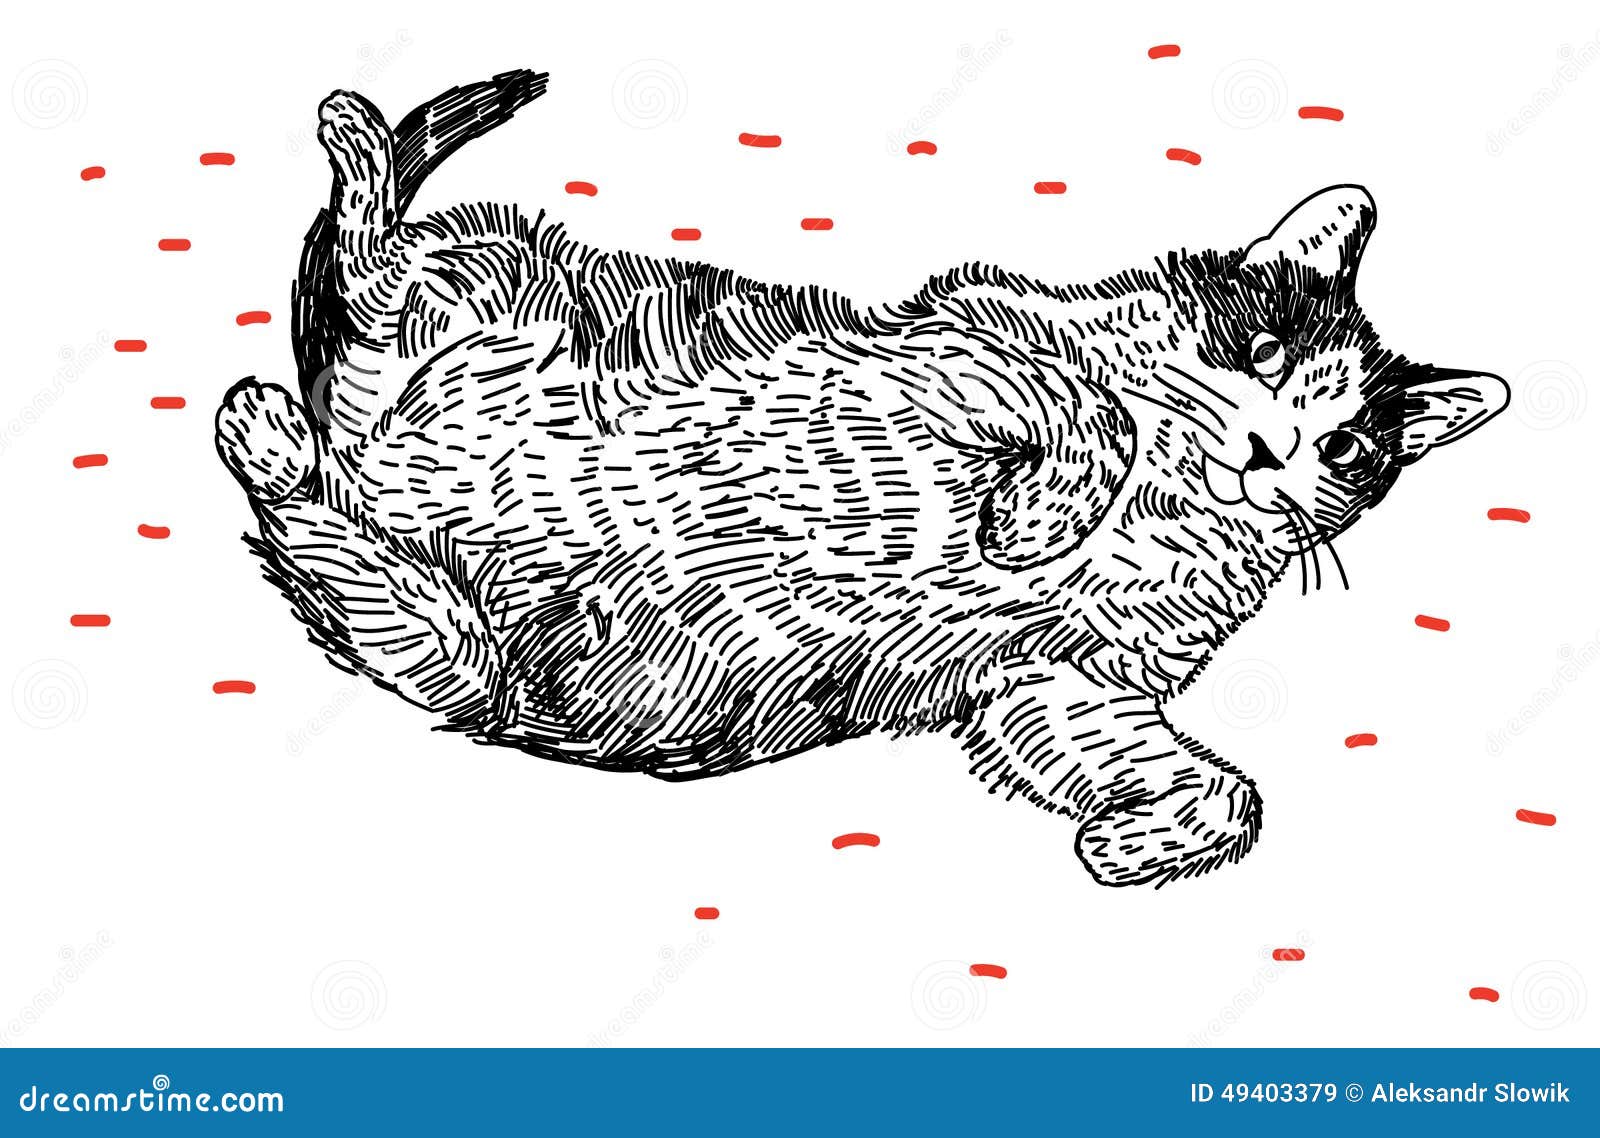 Cat lying on his back stock vector. Illustration of animals 49403379